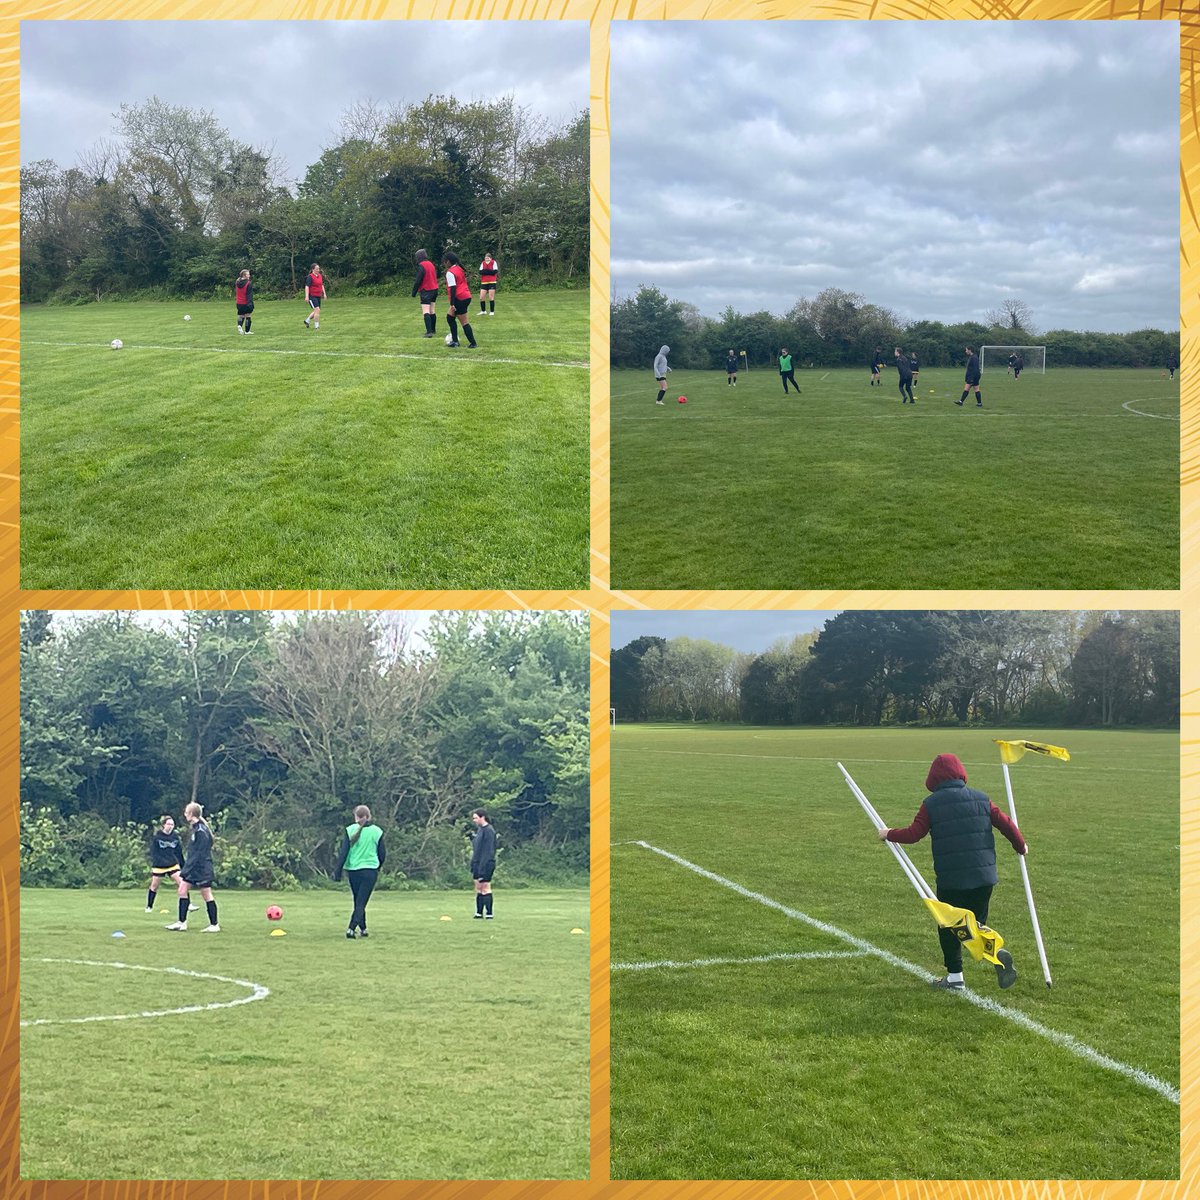 Playing a “friendly” match amongst ourselves after our final ever @NWGFL youth fixture was postponed 💛🖤 #thisgirlcan #hergametoo #weonlydopositive